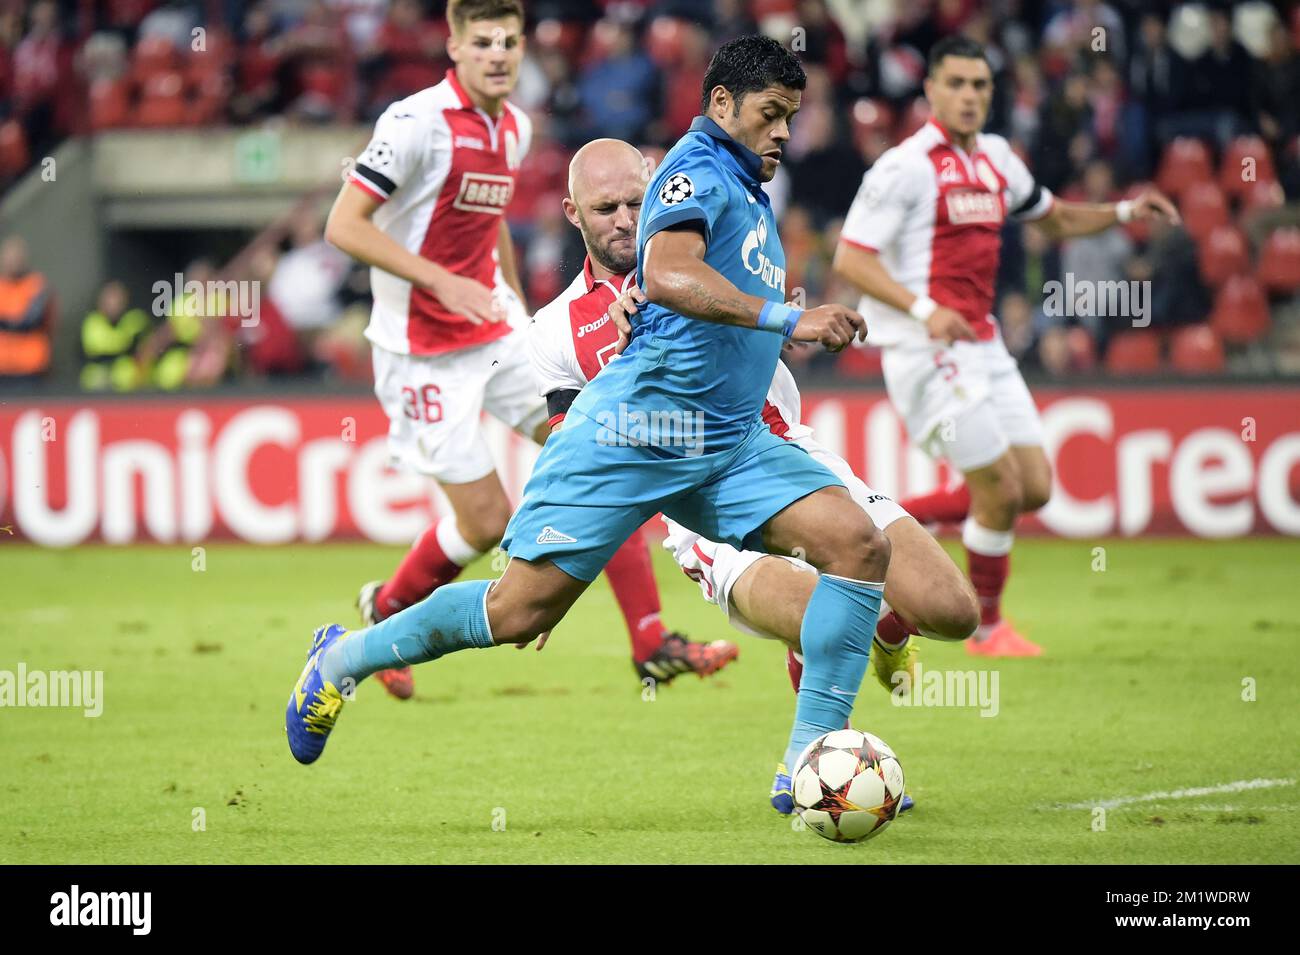 Standard's Jelle Van Damme and Zenit's Hulk fight for the ball during the first leg match between Belgian first division soccer team Standard de Liege and Russian team FC Zenit Saint Petersburg in the playoffs for the UEFA Champions League competition, Wednesday 20 August 2014, in Liege. Stock Photo